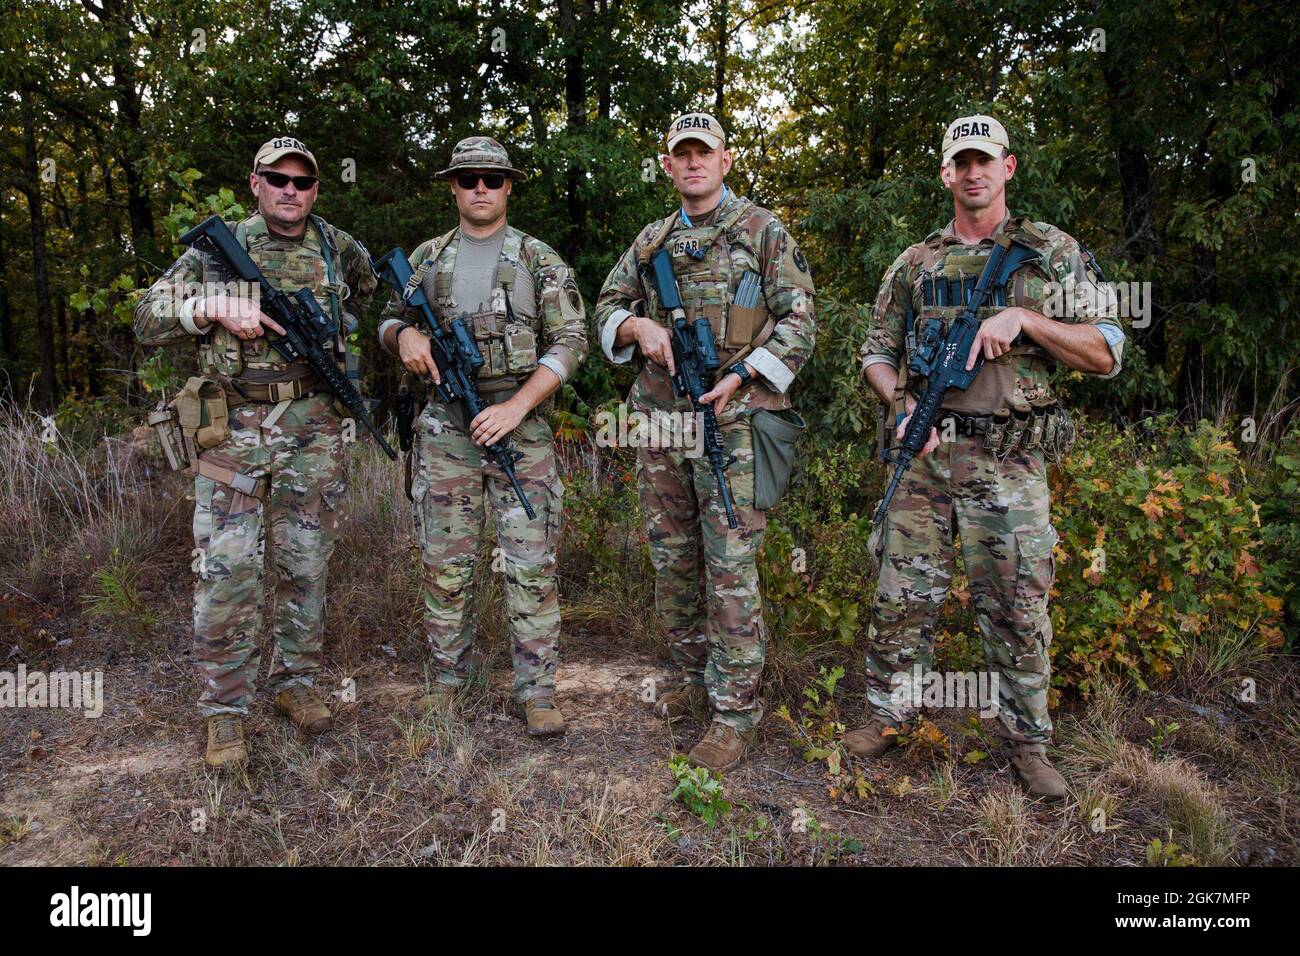 Members of ‘U.S. Army Reserve - Black’ pose for a photo at the 50th Winston P. Wilson & 30th Armed Forces Skill at Arms Meeting, held at the National Guard Marksmanship Training Center on Robinson Maneuver Training Center, North Little Rock, Arkansas. The U.S. Army Reserve marksmanship teams represent the entire U.S. Army Reserve and are chosen for the team through a rigorous selection shoot days before the pistol & rifle championships.    U.S. Army Reserve - Black Members: U.S. Army Maj. Thomas Conners, U.S. Army Sgt. 1st Class Jason Godel, U.S. Army Staff Sgt. Sean Morris, U.S. Army Sgt. Dev Stock Photo